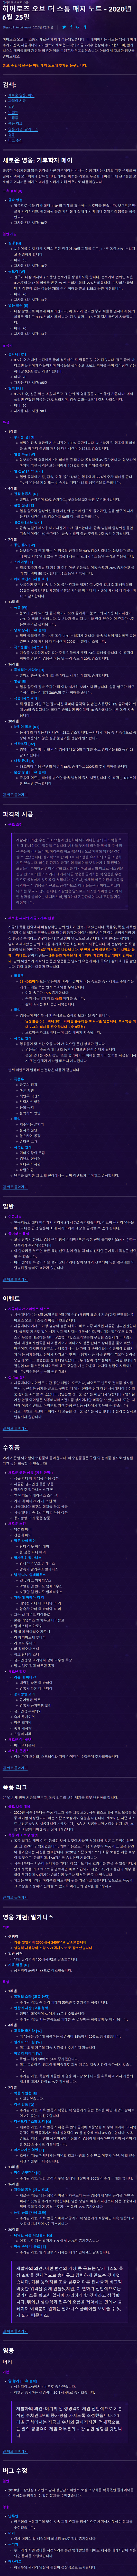 51.0_KR_Patch_2.png